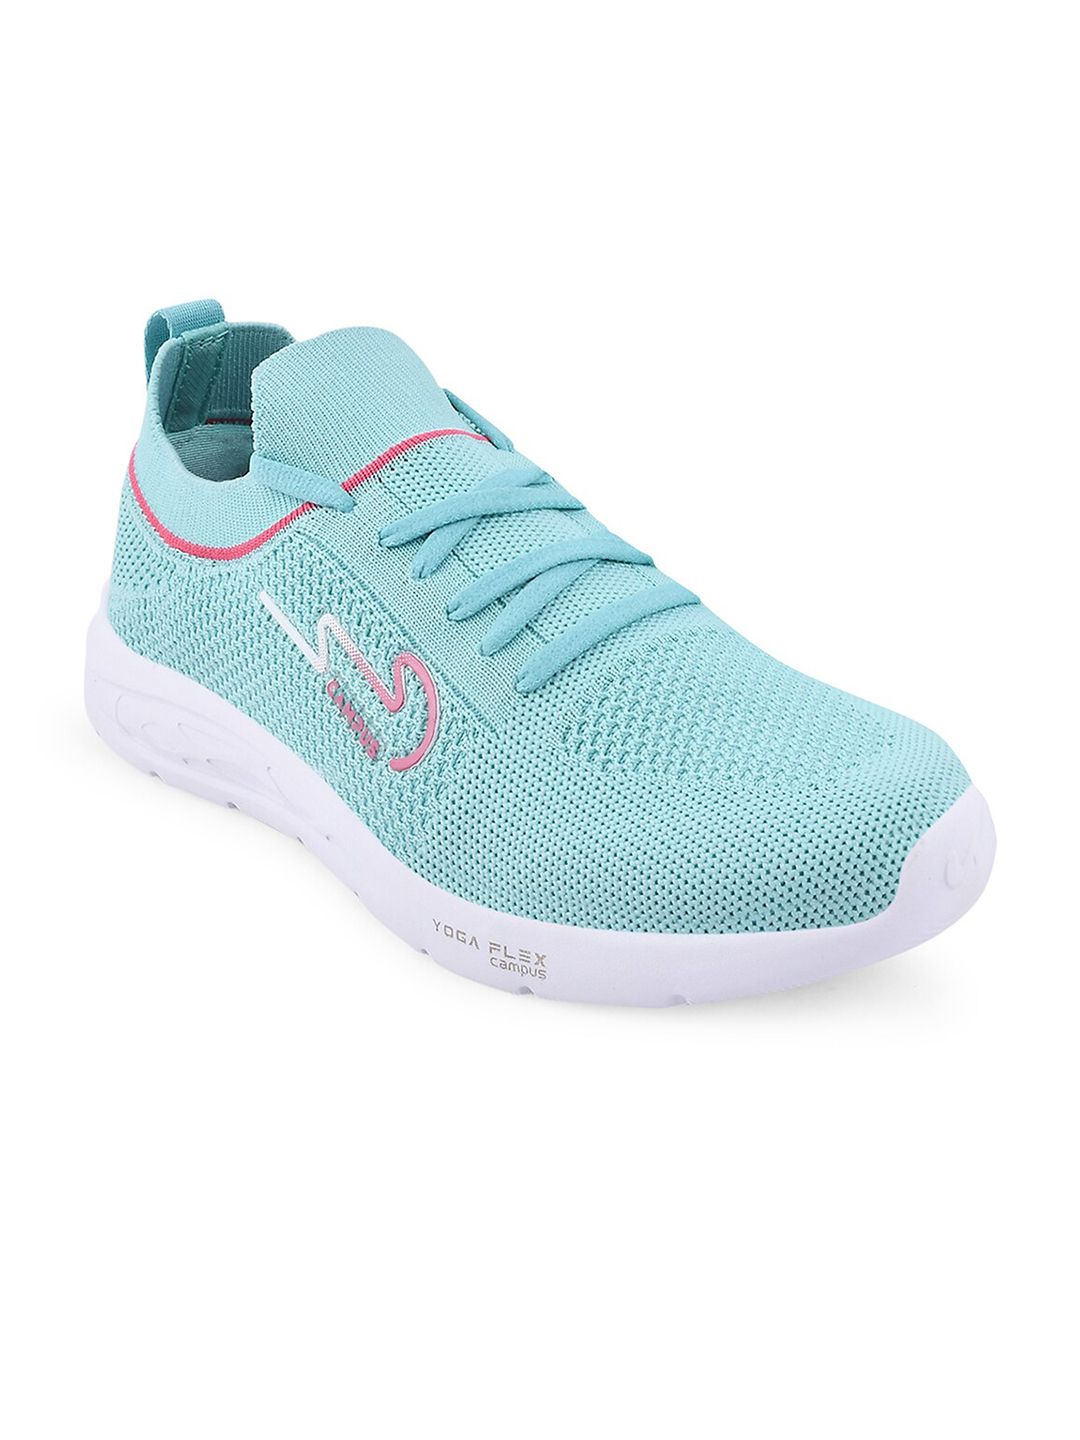 Campus Women Blue Mesh Running Shoes Price in India